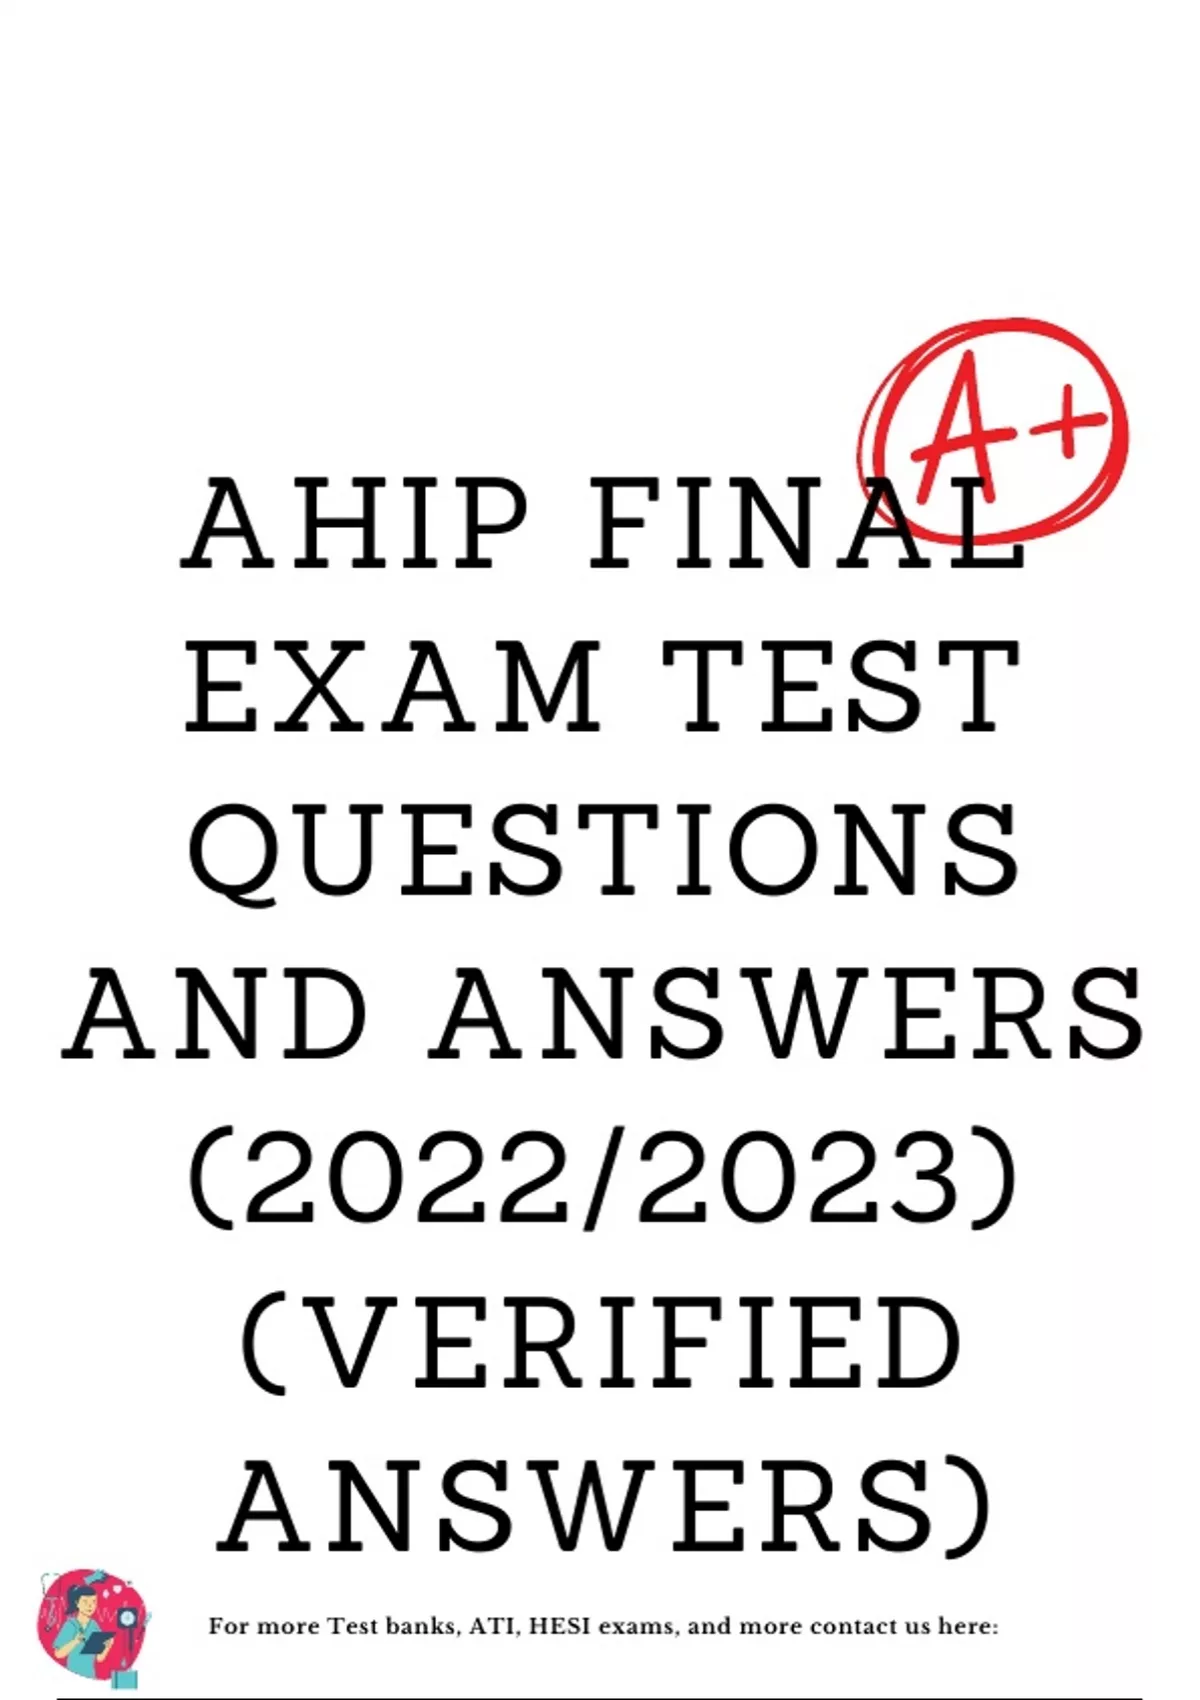 AHIP Final Exam Test Questions and Answers (2022/2023) (Verified